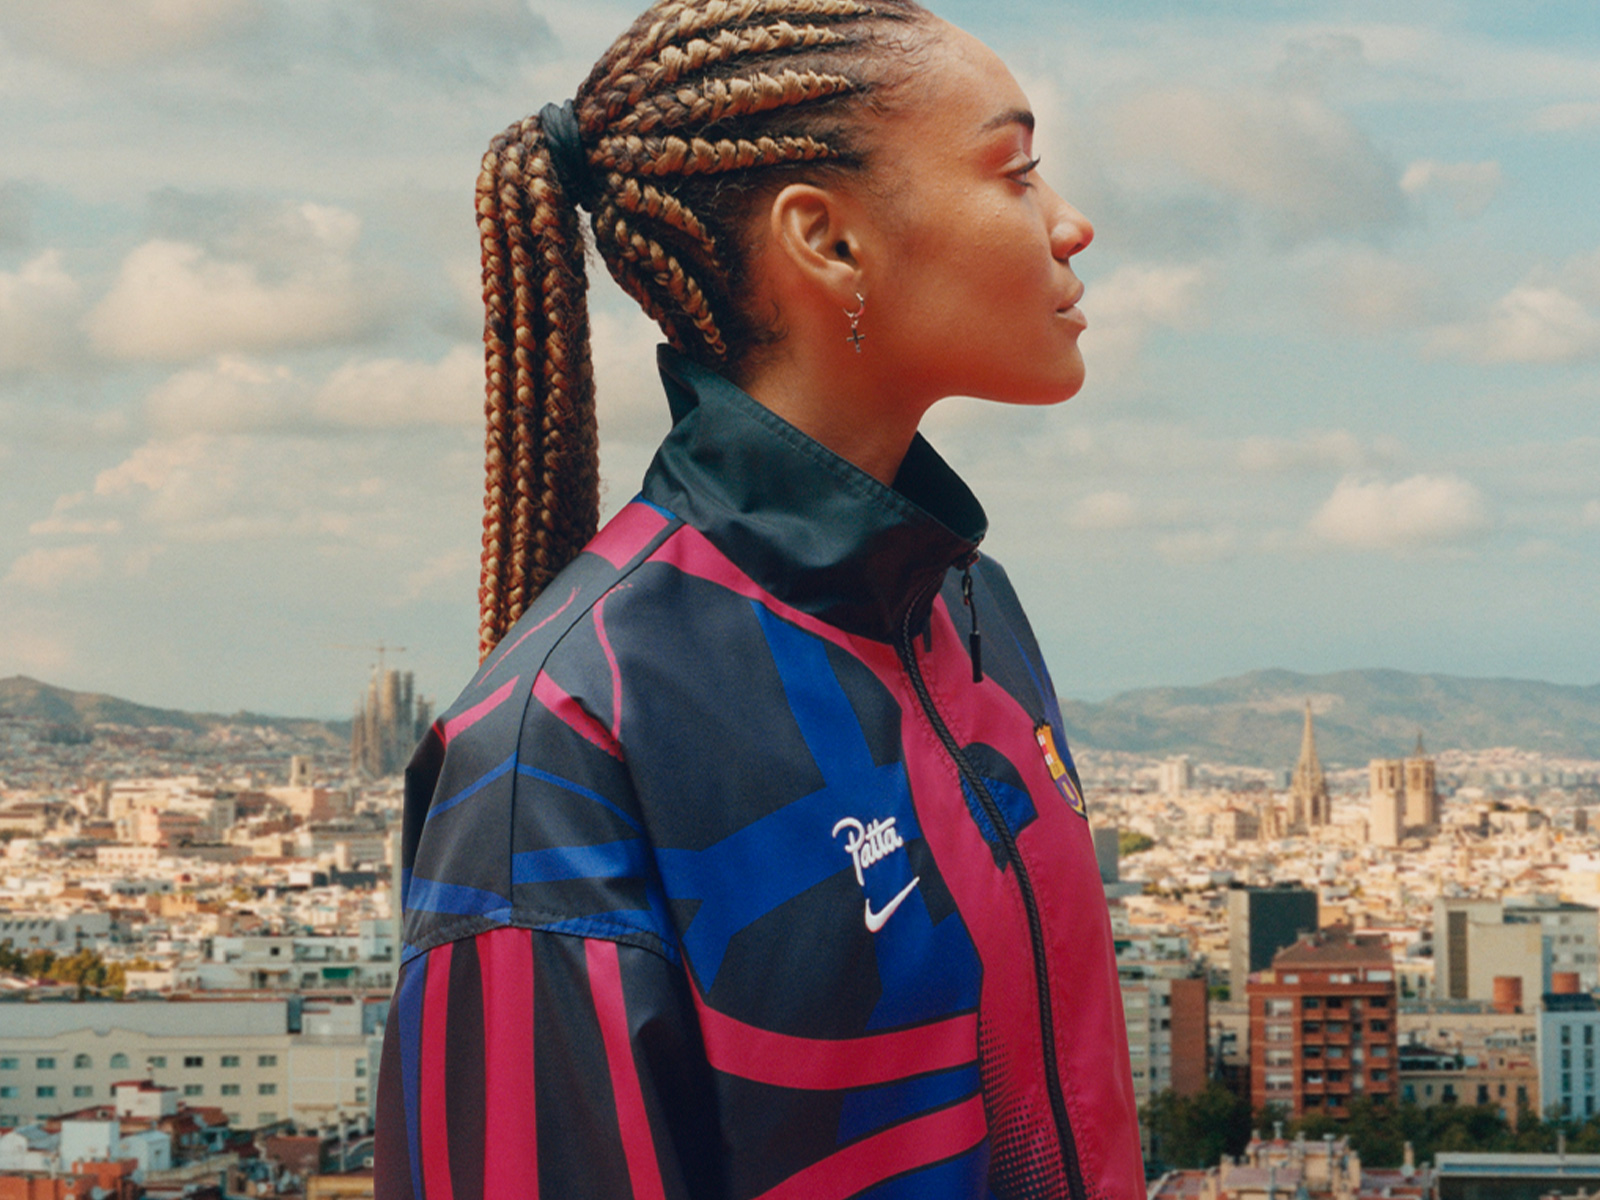 FC Barcelona launches clothing line in collaboration with Patta